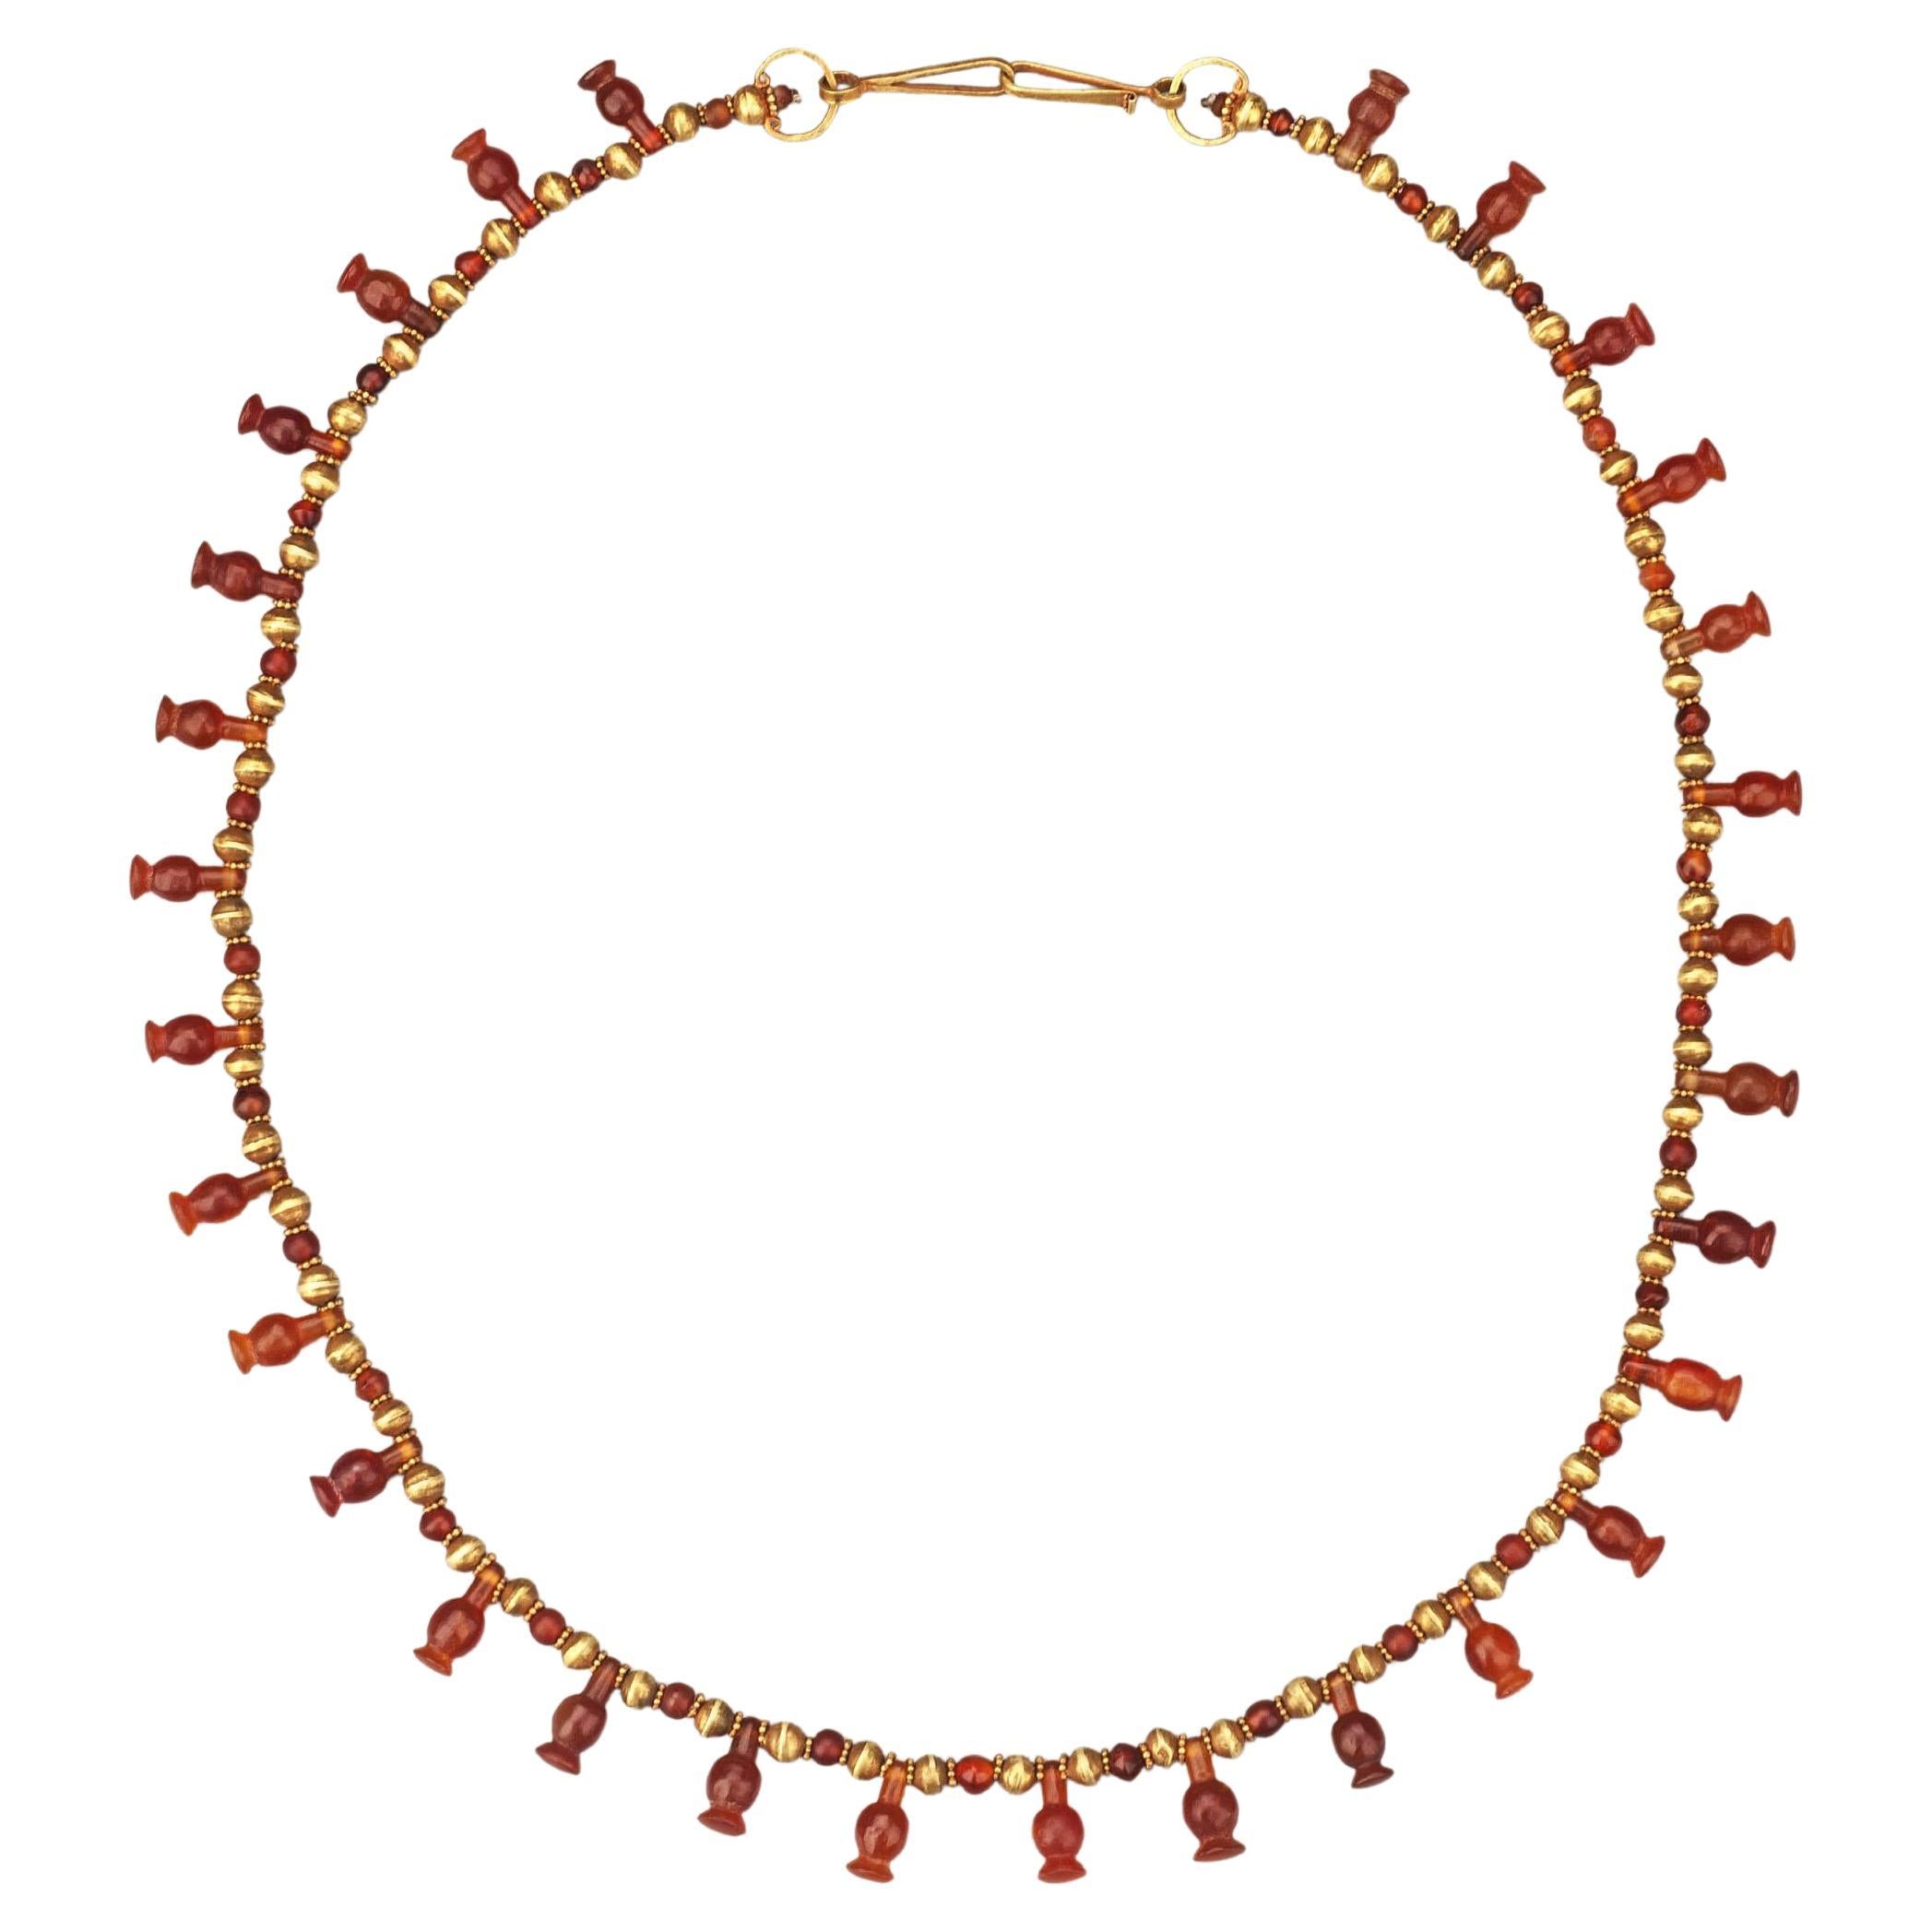 Ancient Egyptian Carnelian Poppy Seed Pod Pendant Necklace with 20k Gold Beads For Sale